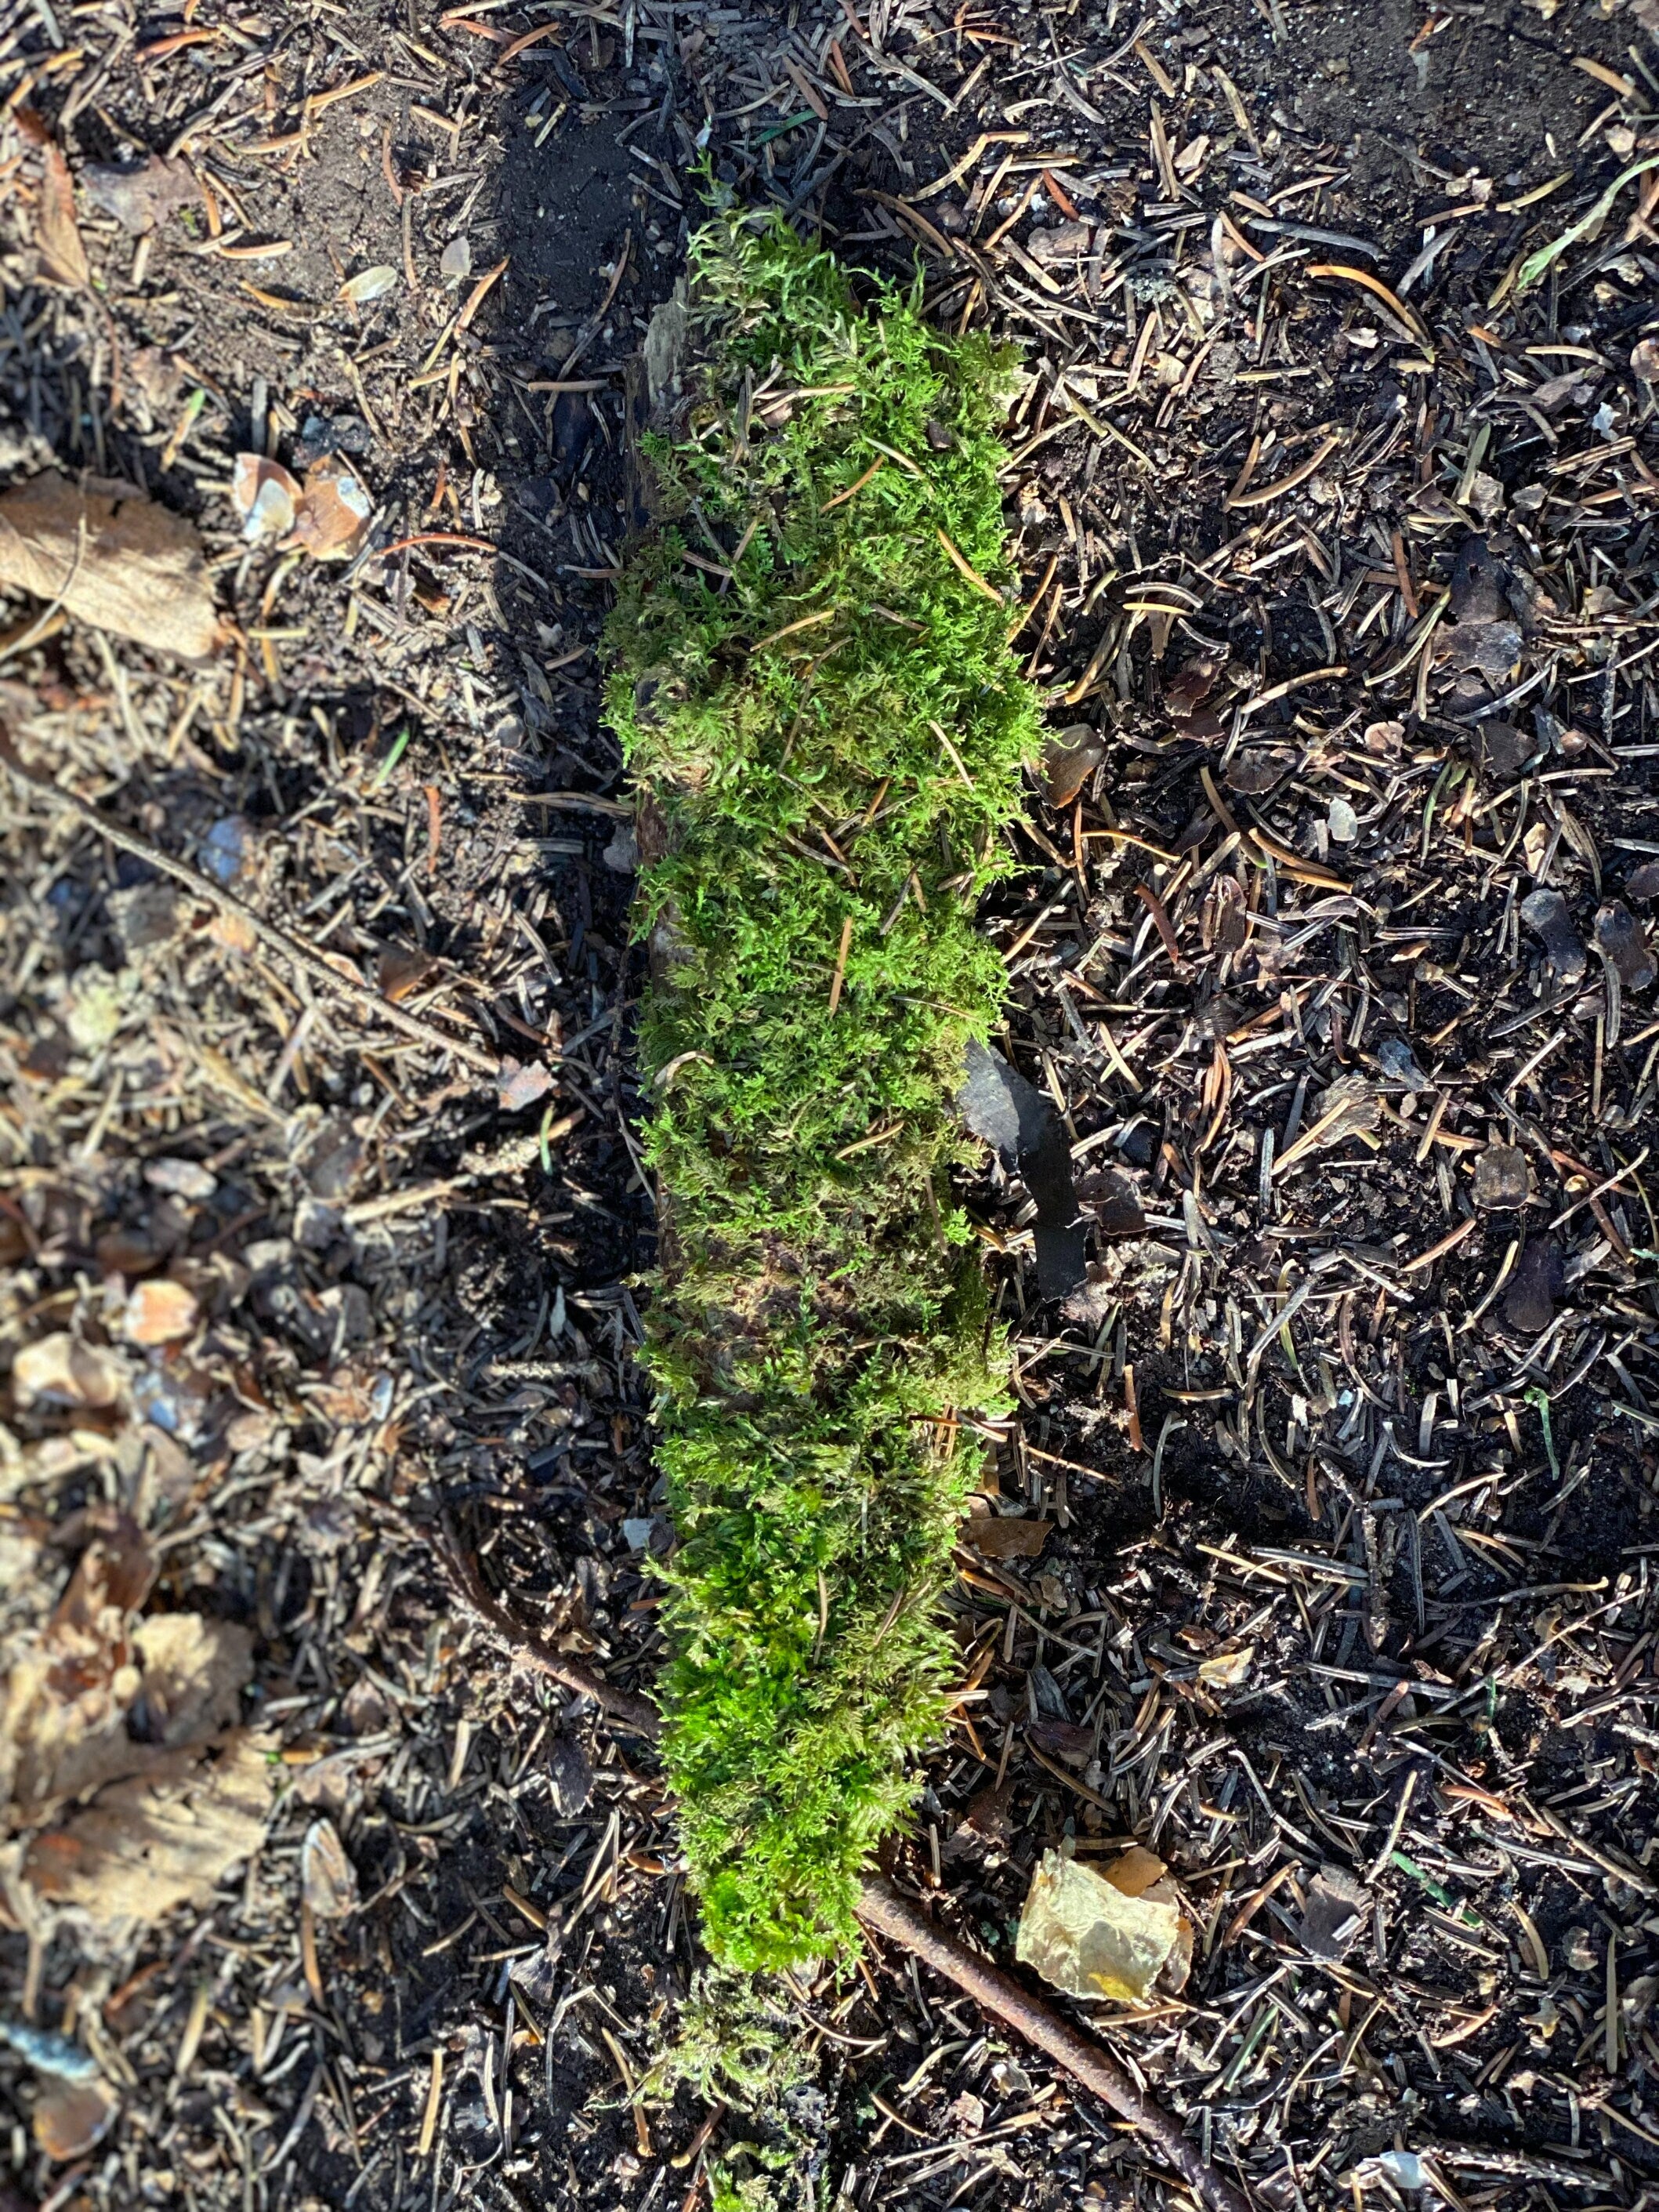 Live Moss Stick, Mossy Stick Approximately 9 Inches Long x 2 Inches Wide x About 2 Inches High